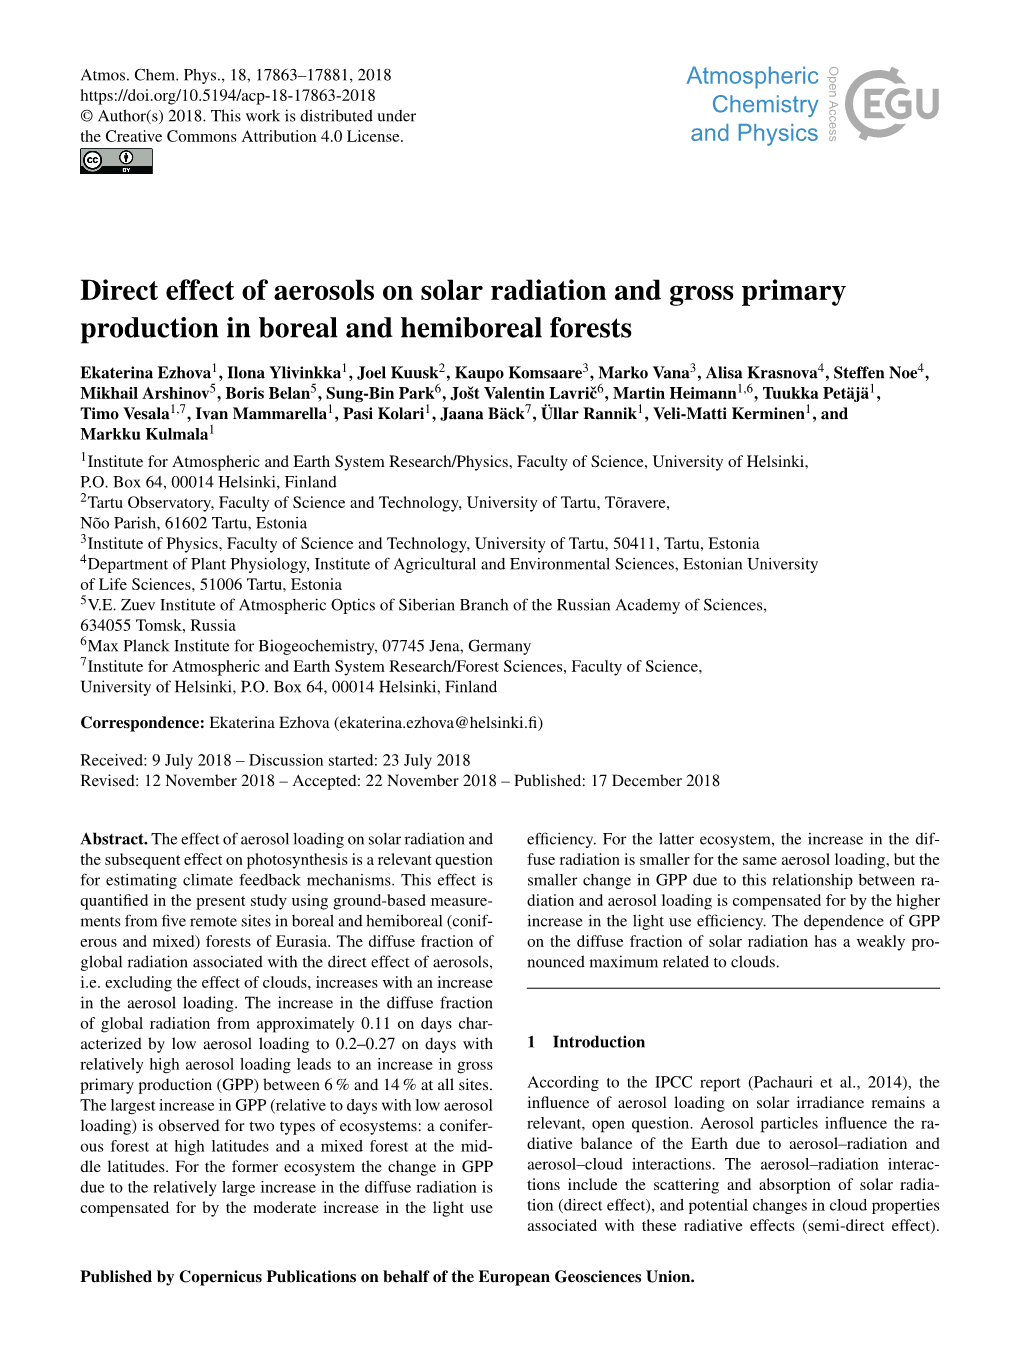 Articles Inﬂuence the Ra- Ous Forest at High Latitudes and a Mixed Forest at the Mid- Diative Balance of the Earth Due to Aerosol–Radiation and Dle Latitudes